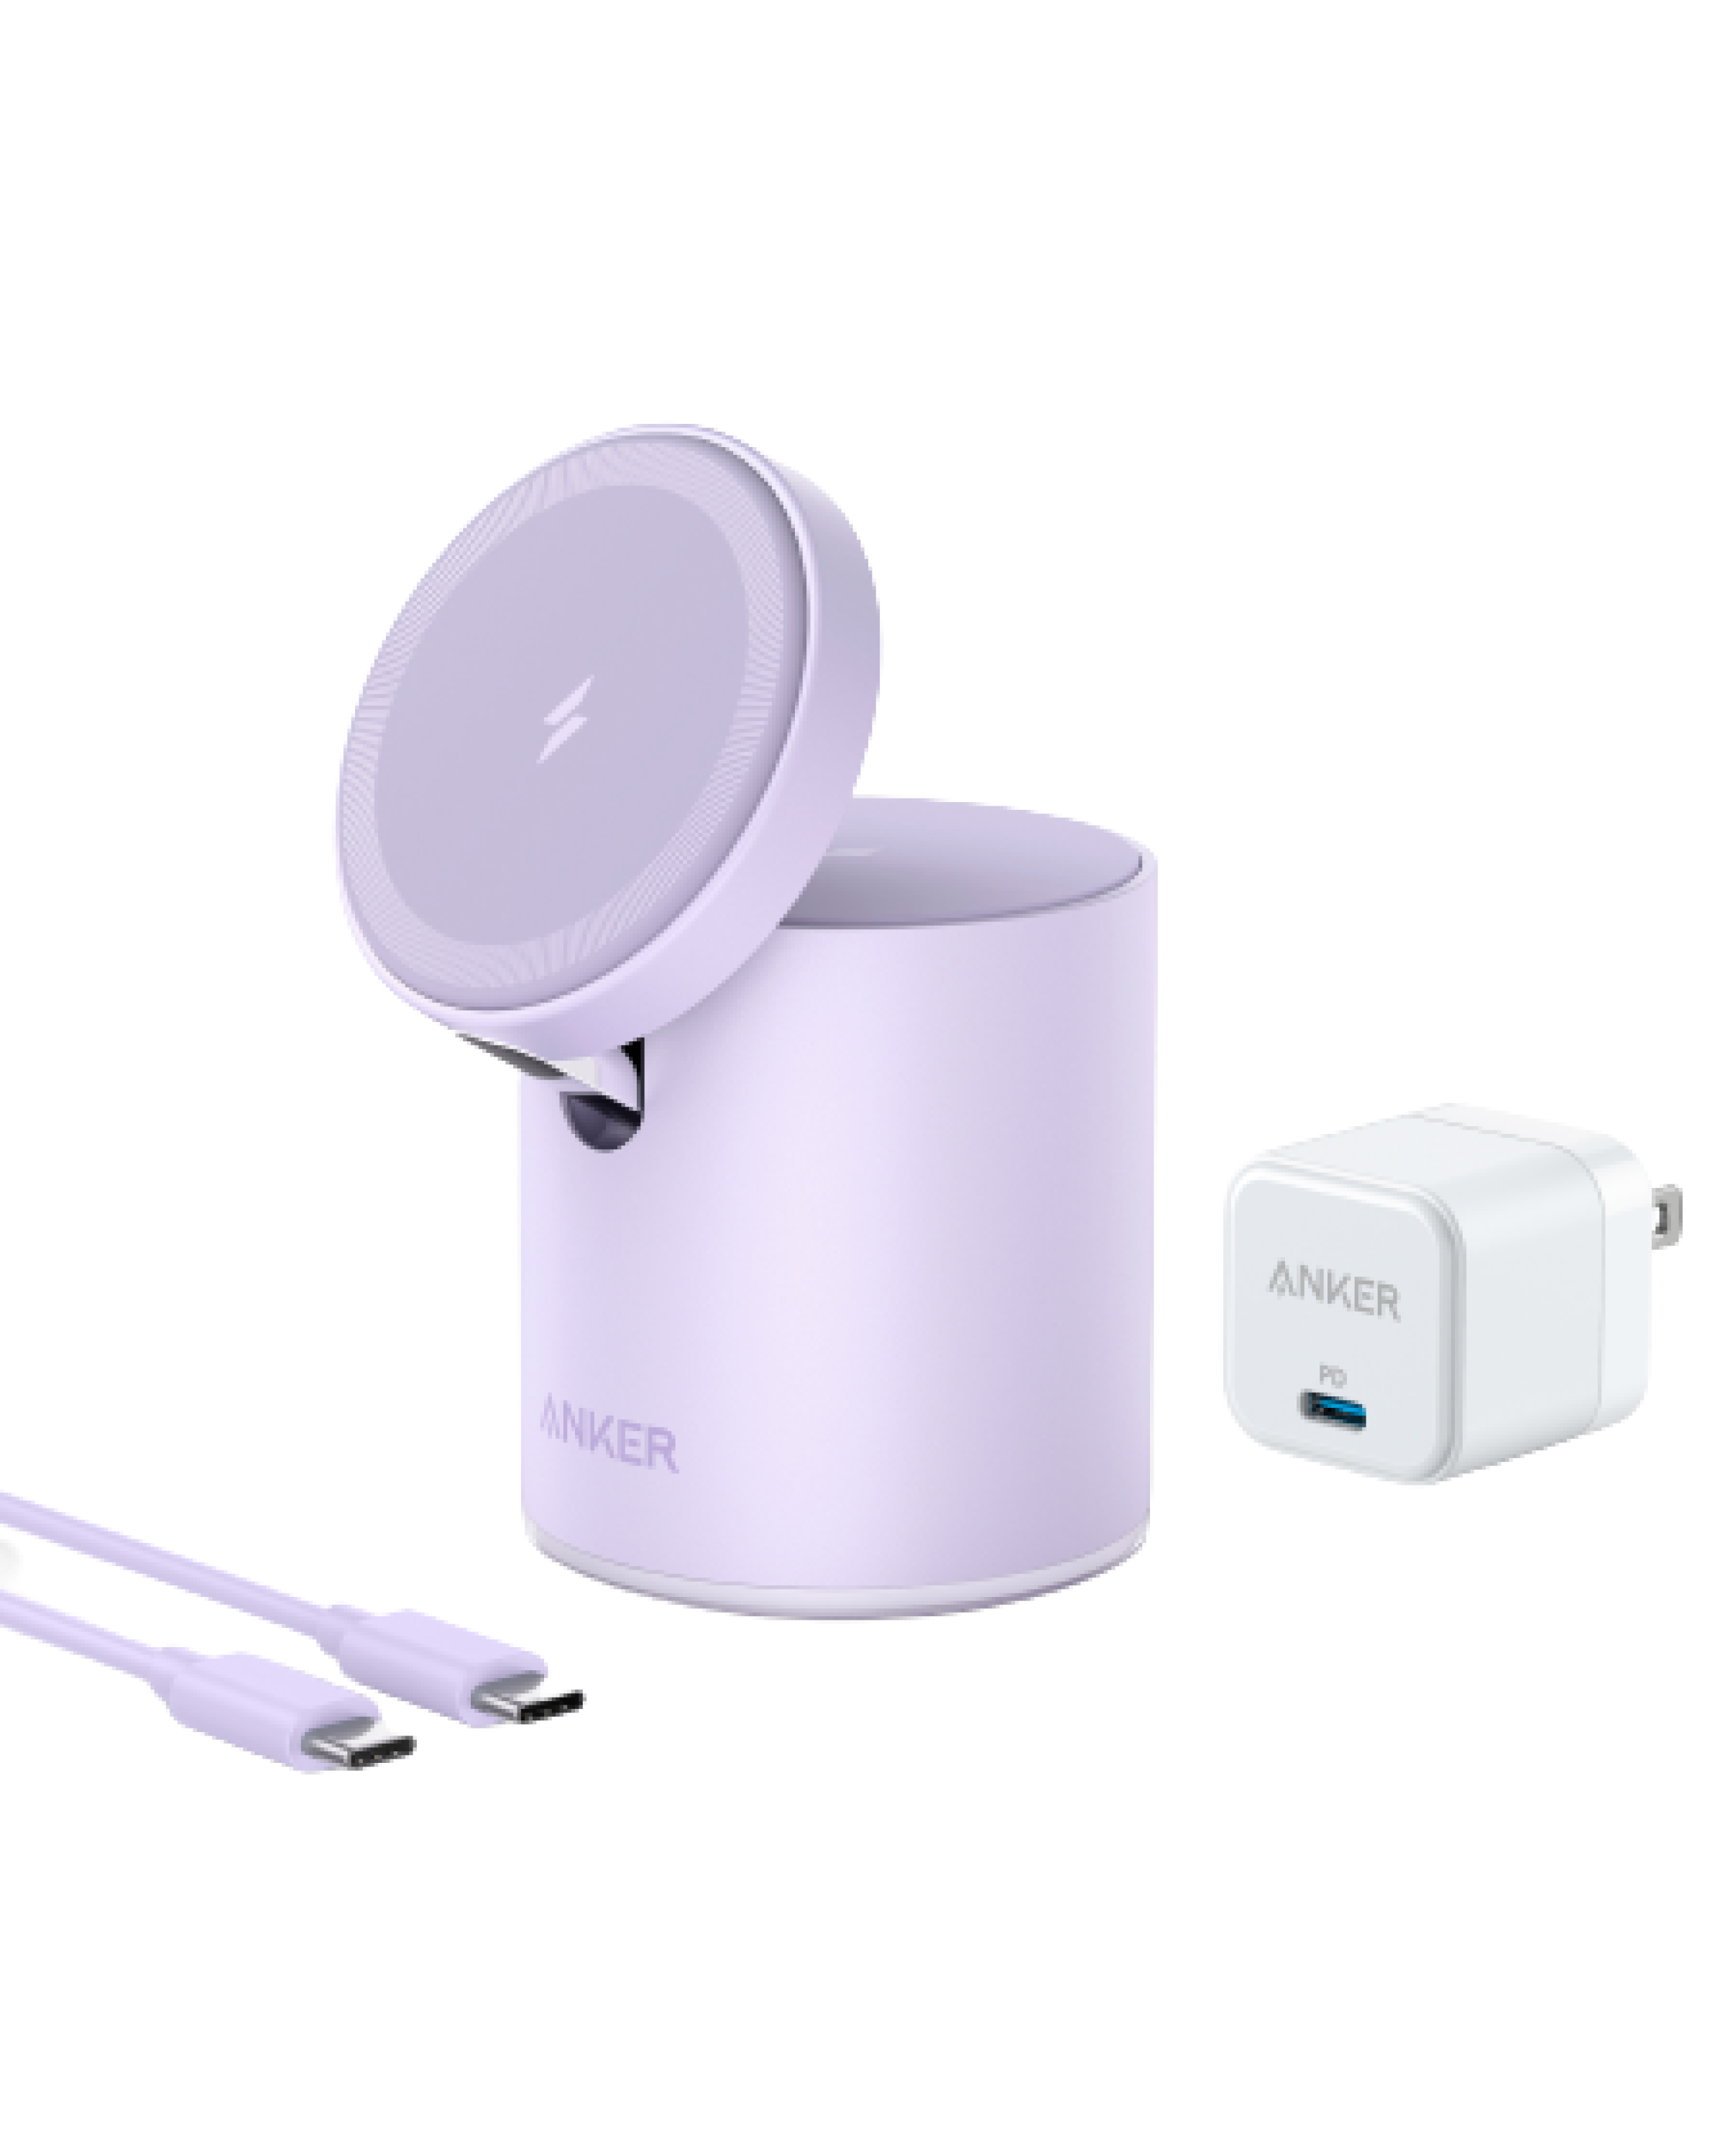 Anker taps MagSafe for its new MagGo accessory range